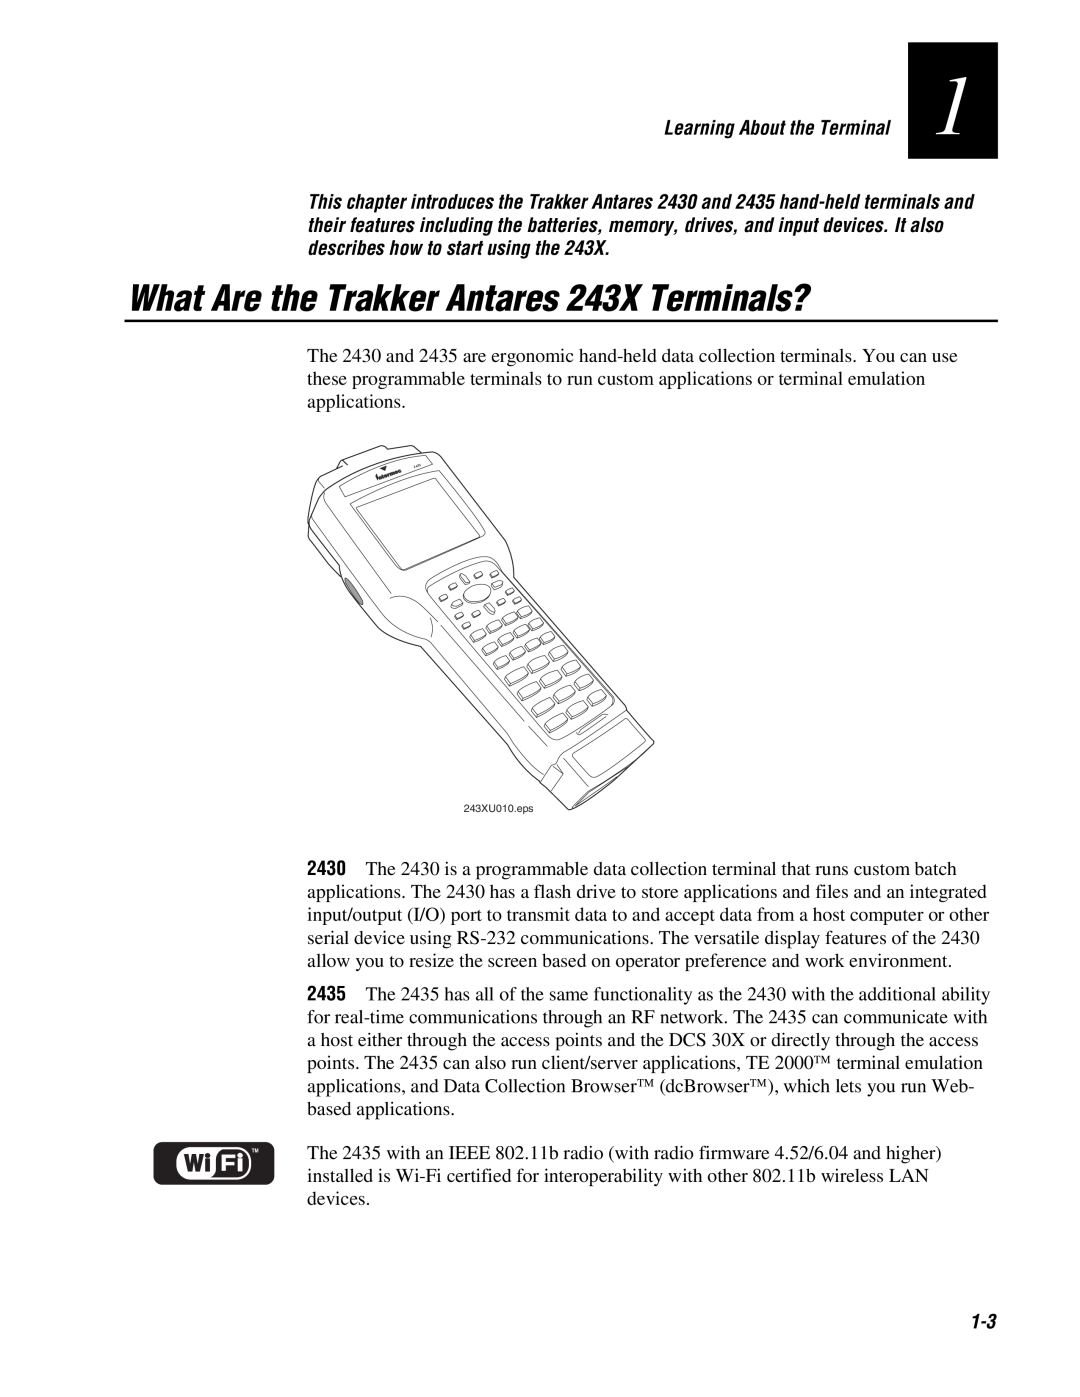 IBM user manual What Are the Trakker Antares 243X Terminals? 